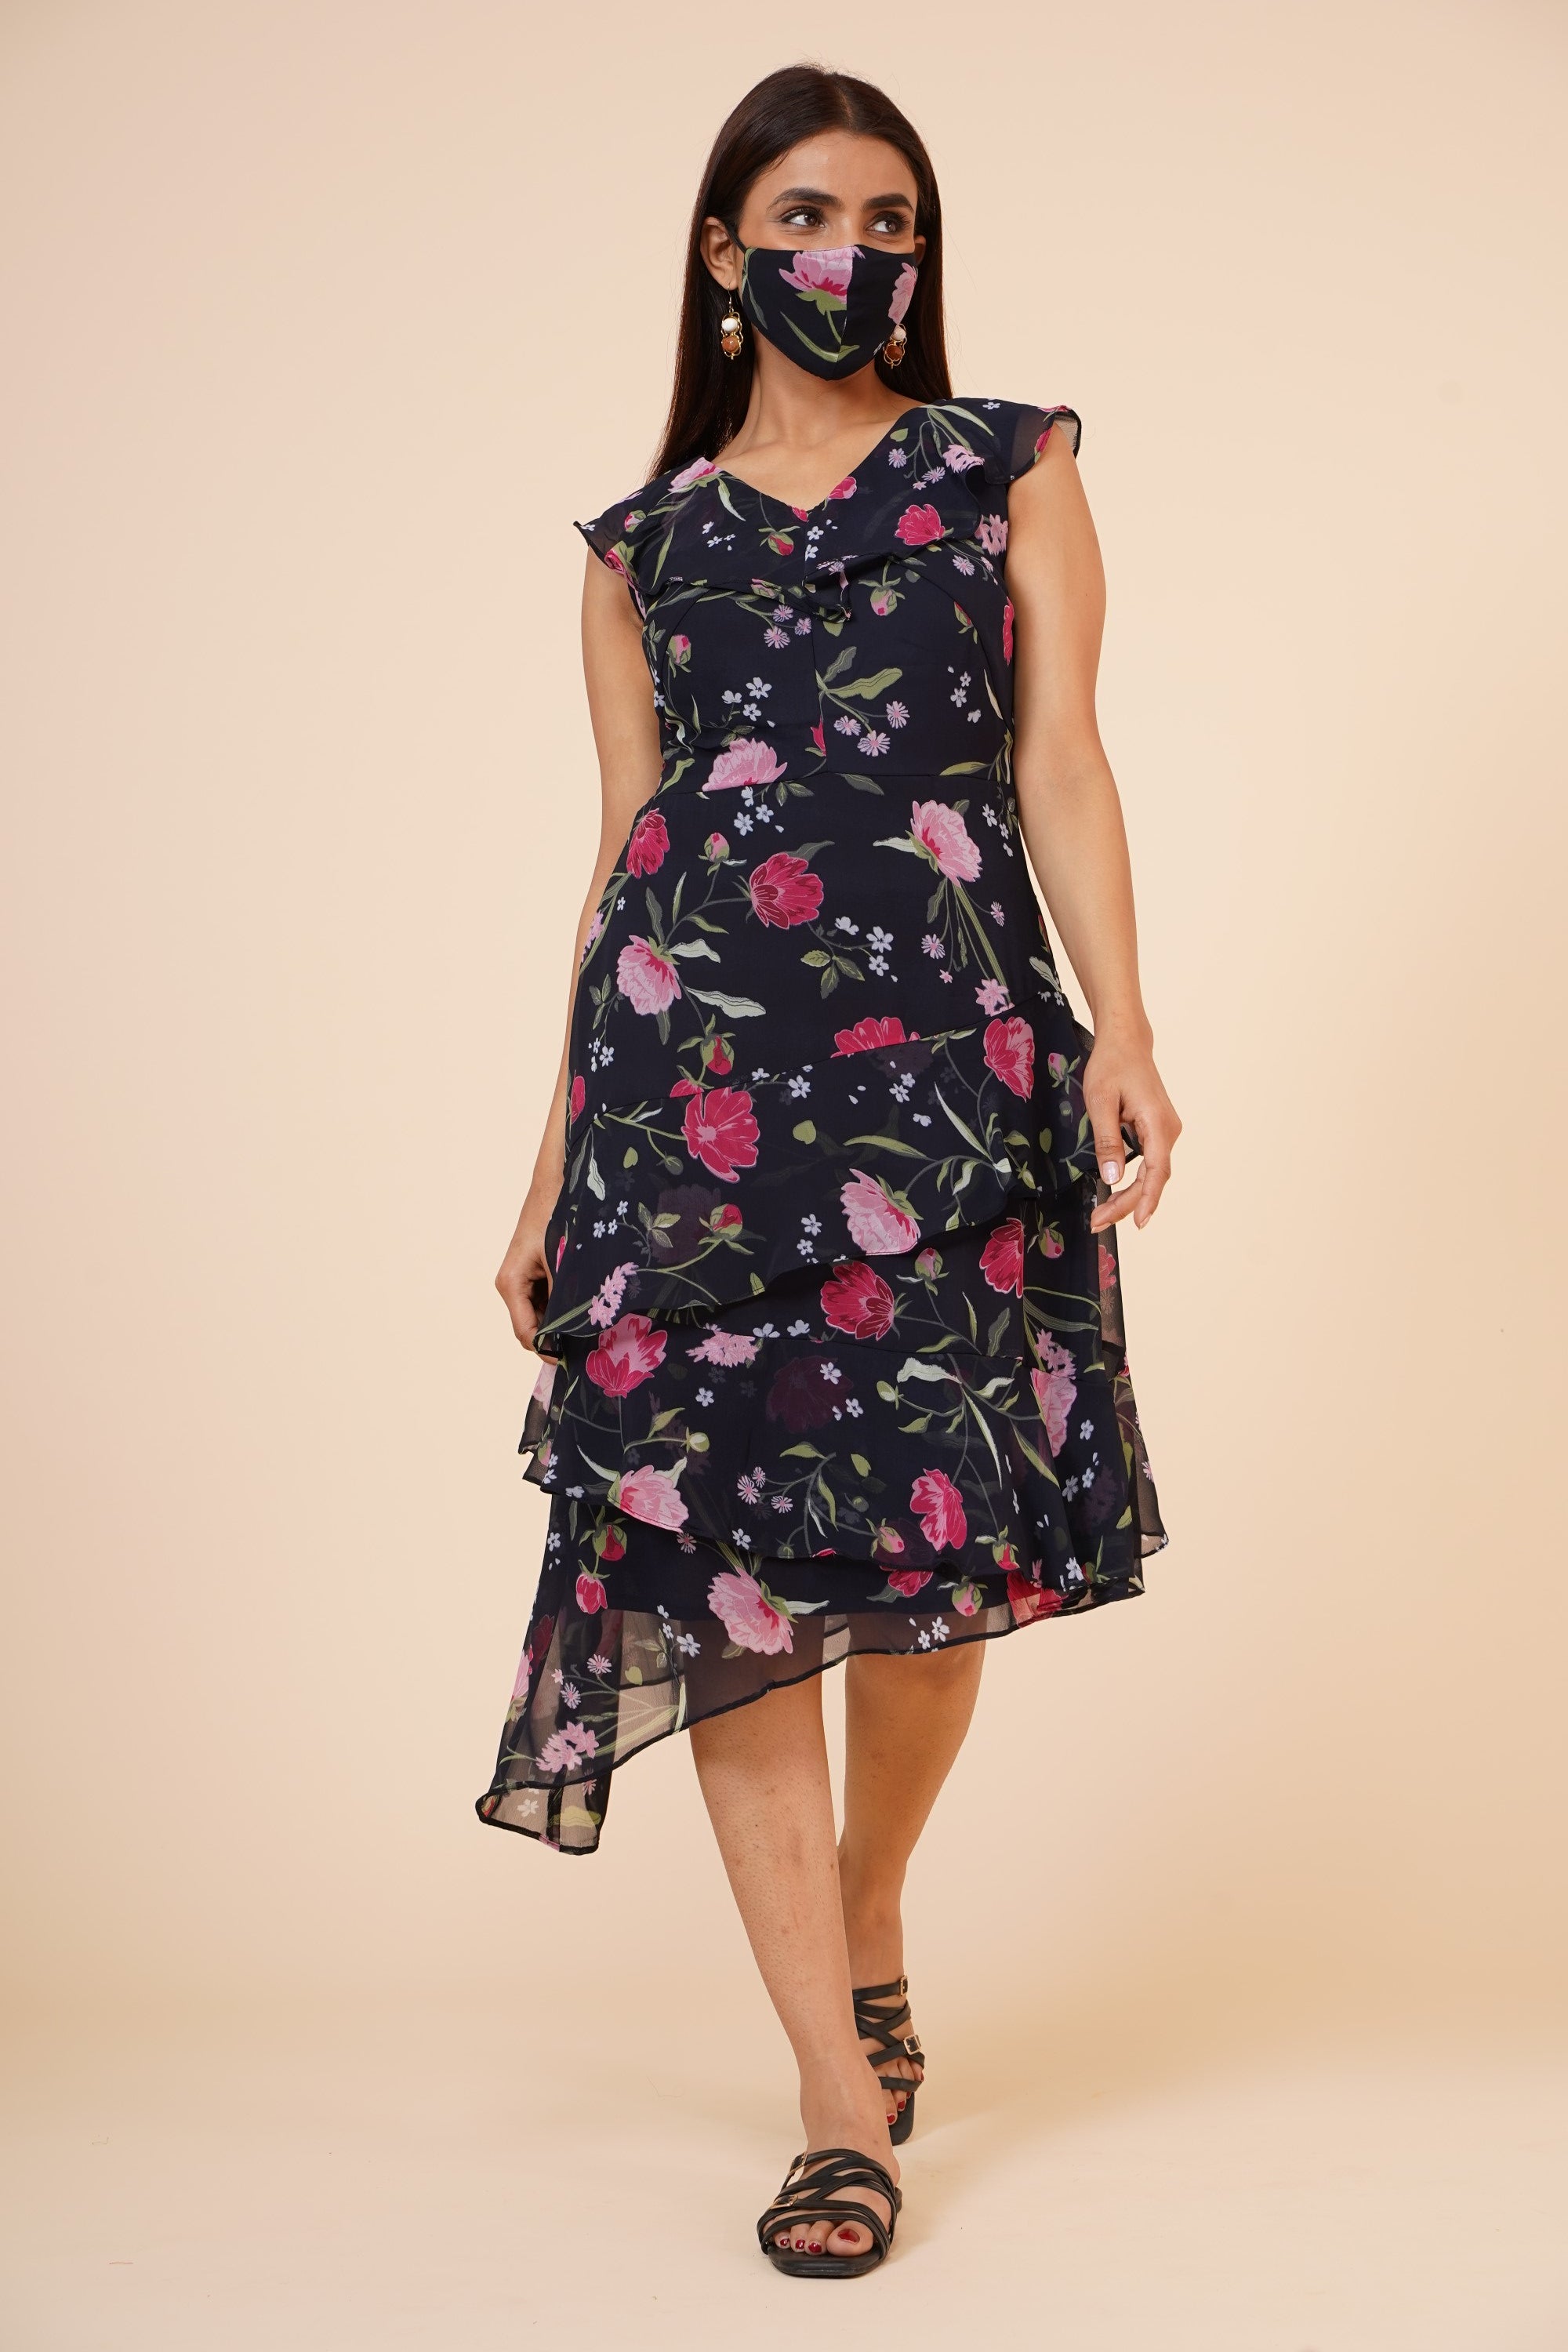 Women's Black Floral Printed Georgette  Ruffle   Dress - MIRACOLOS by Ruchi